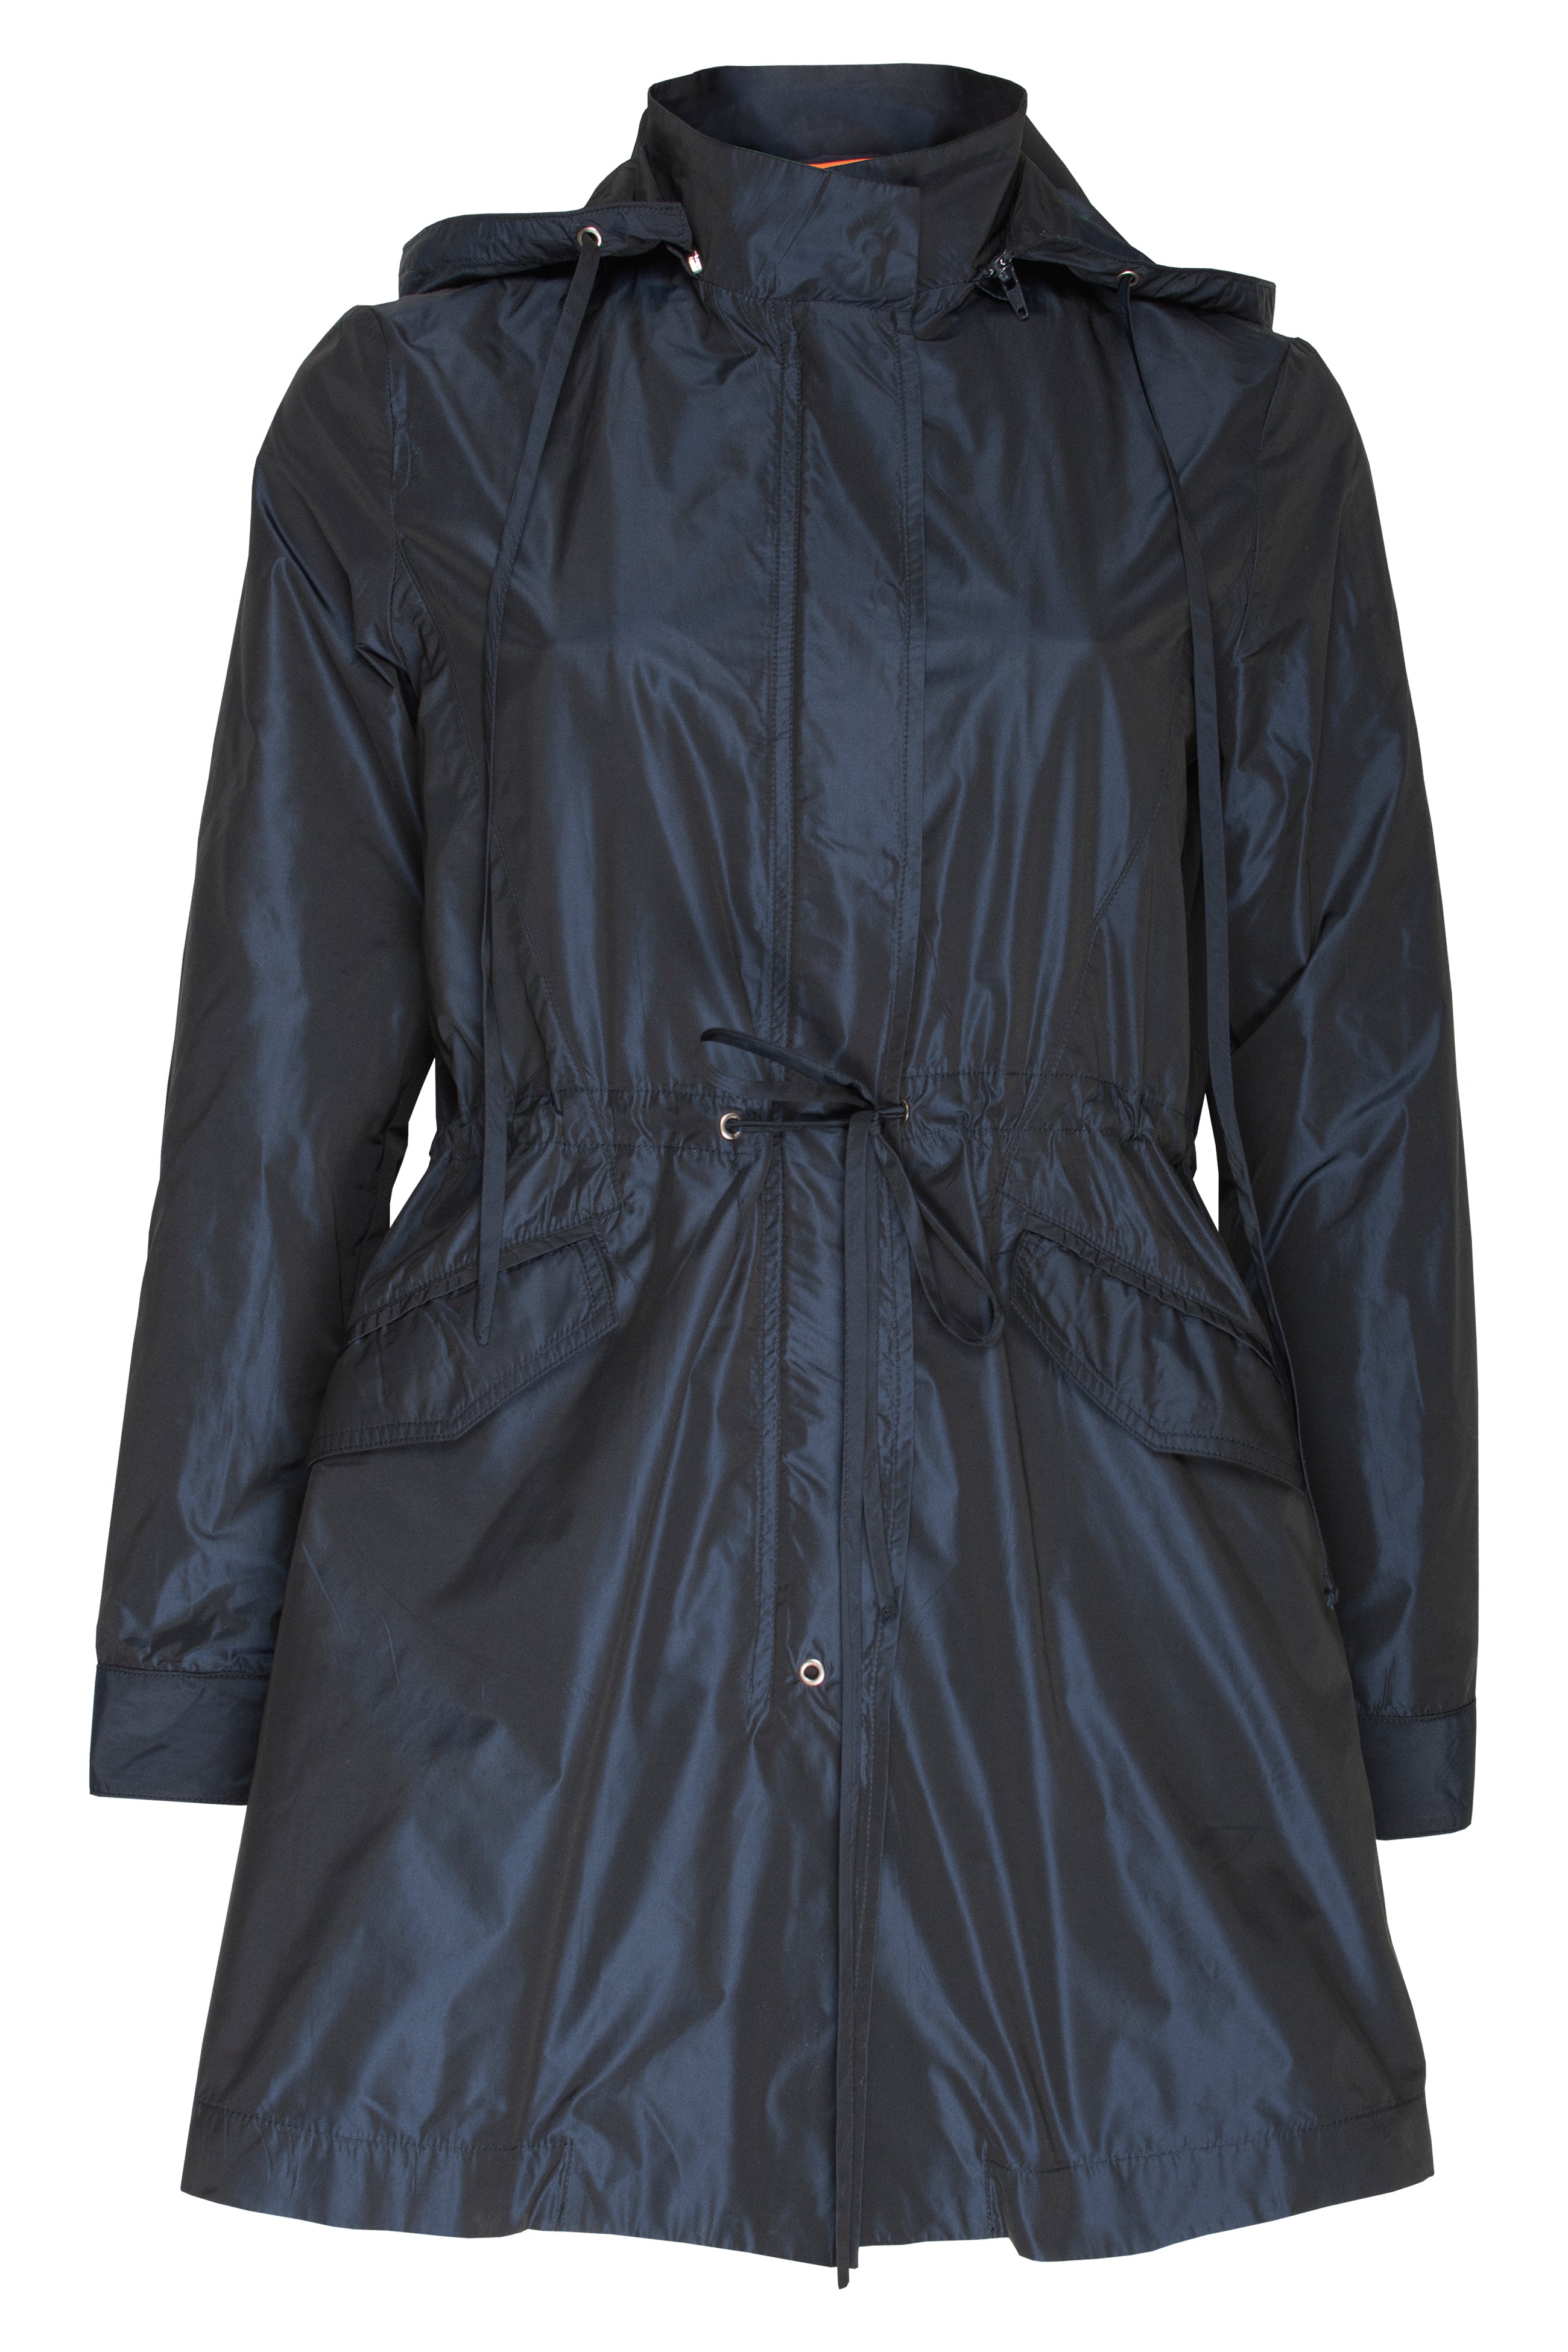 Navy Detachable Hood Trench 6258 – DIGBYS Boutique